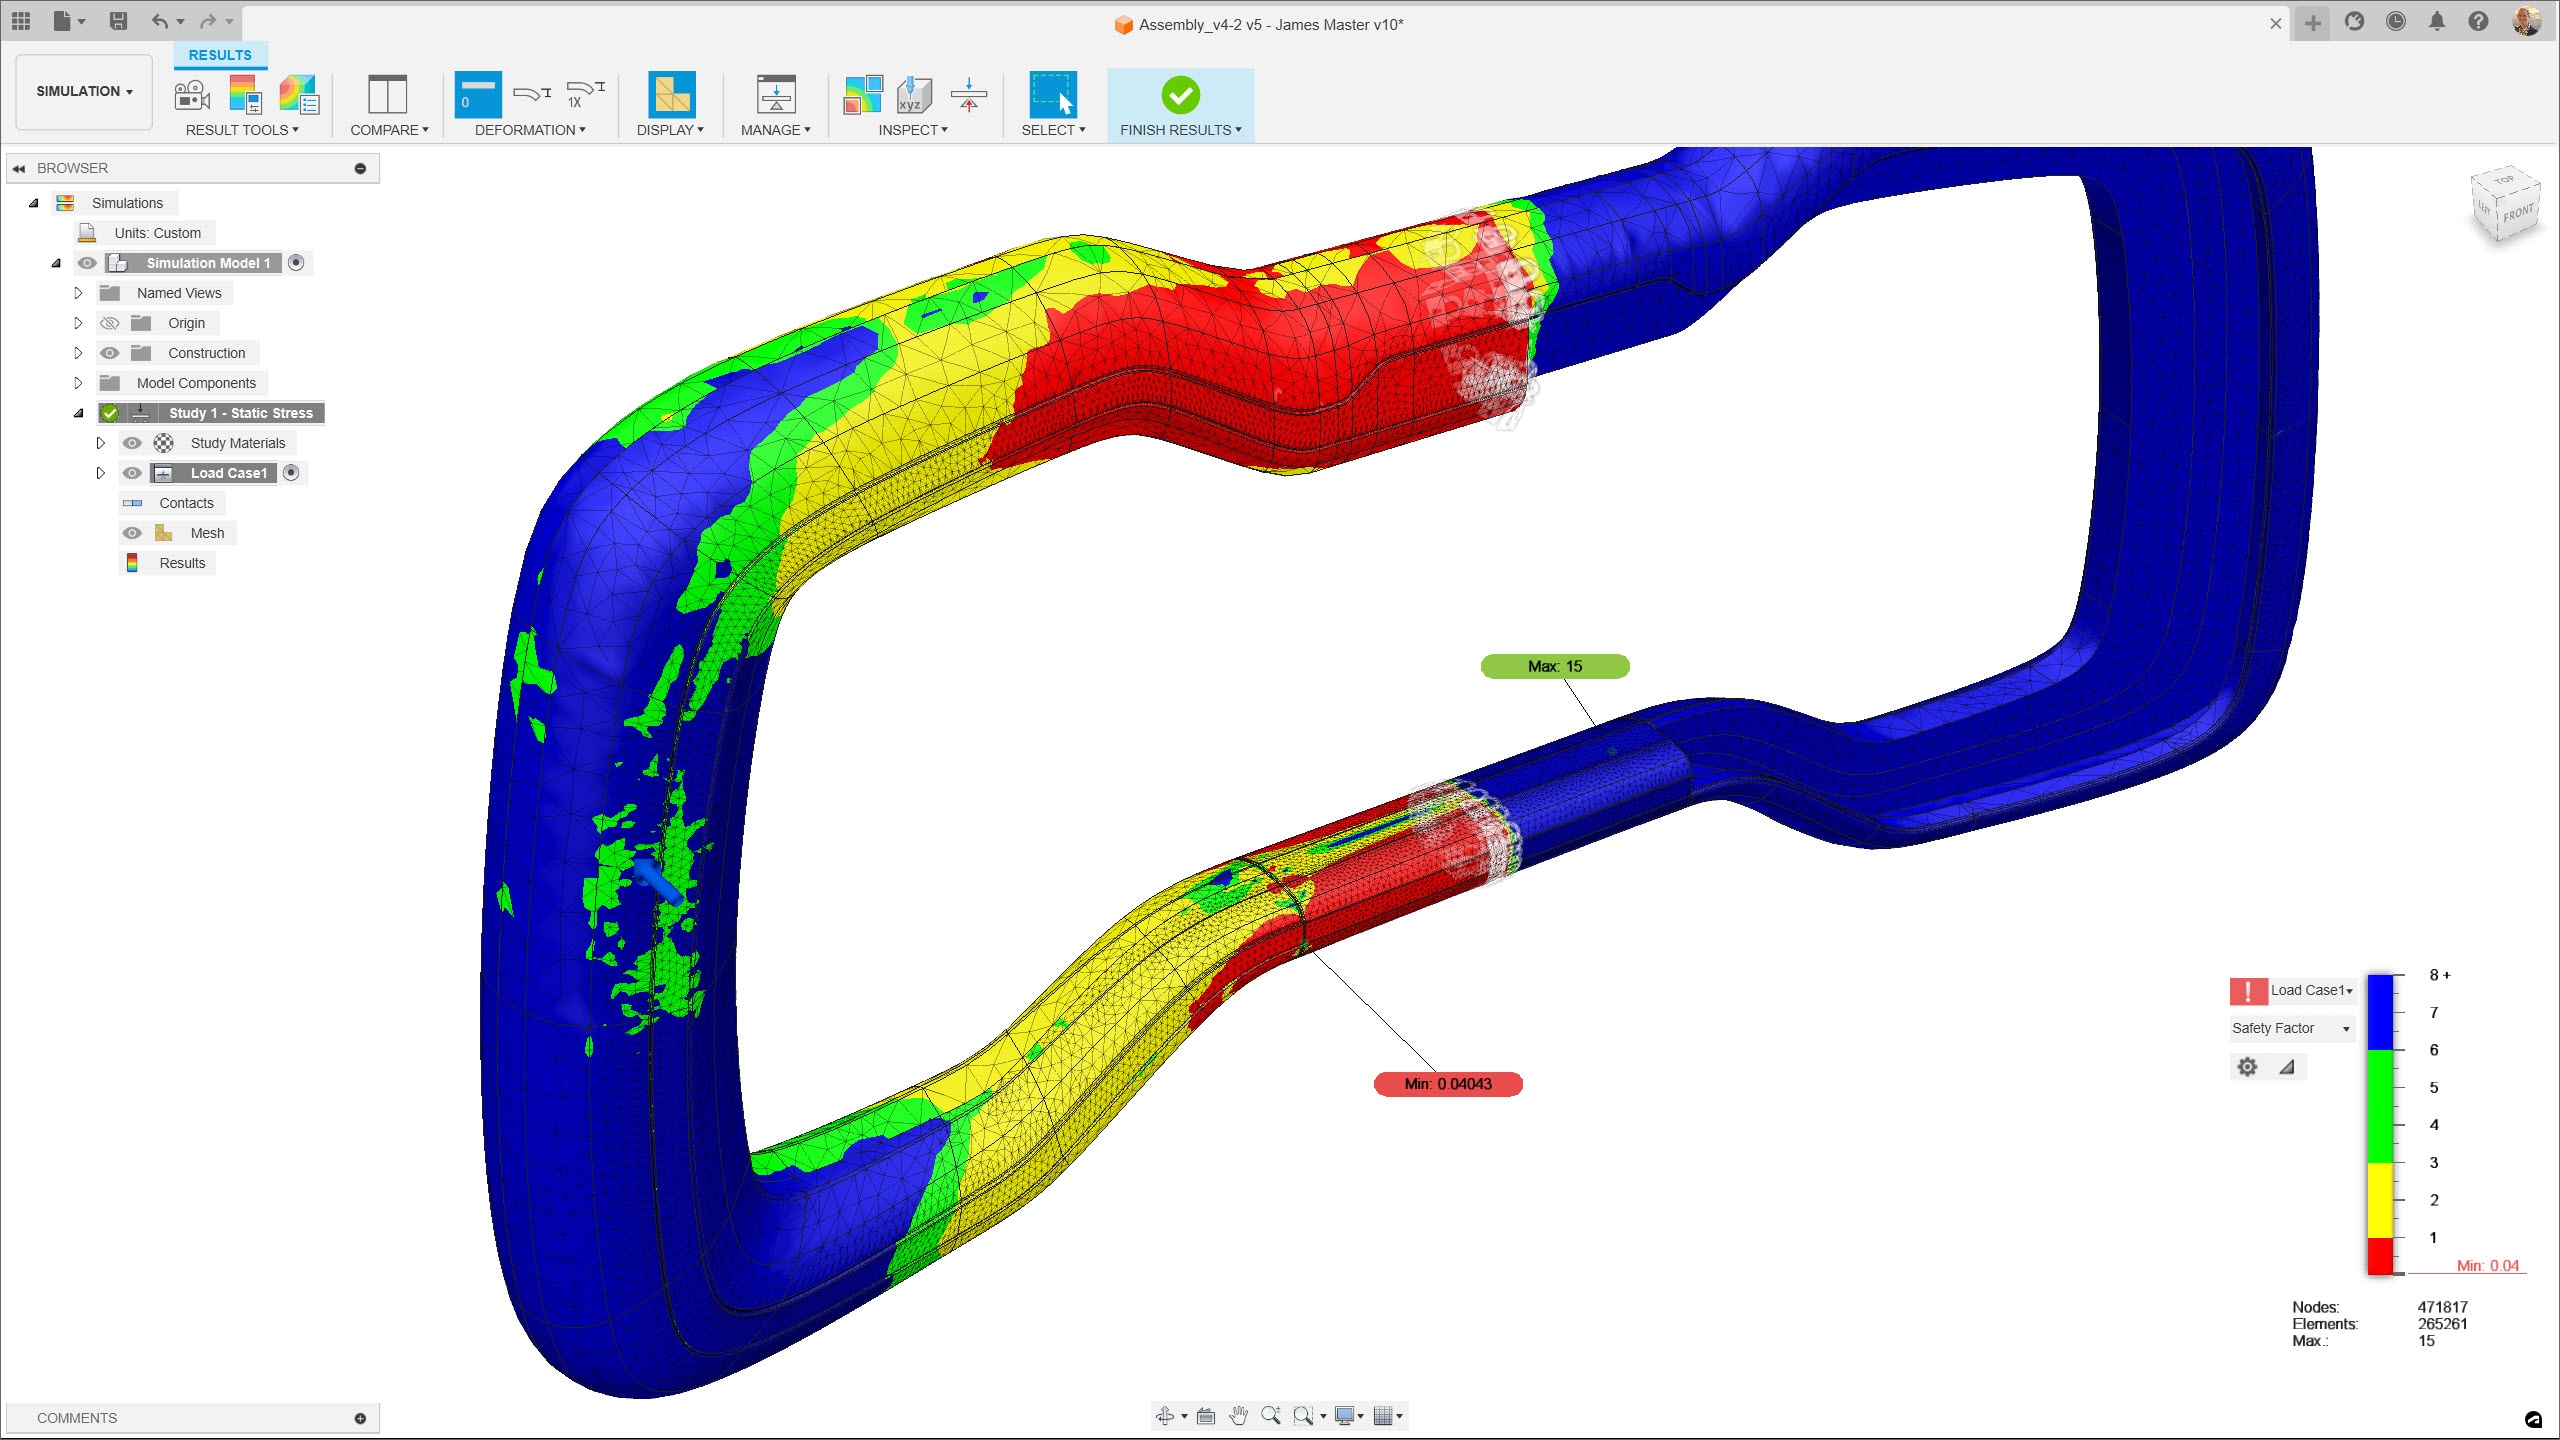 Simulation analysis in Autodesk Fusion